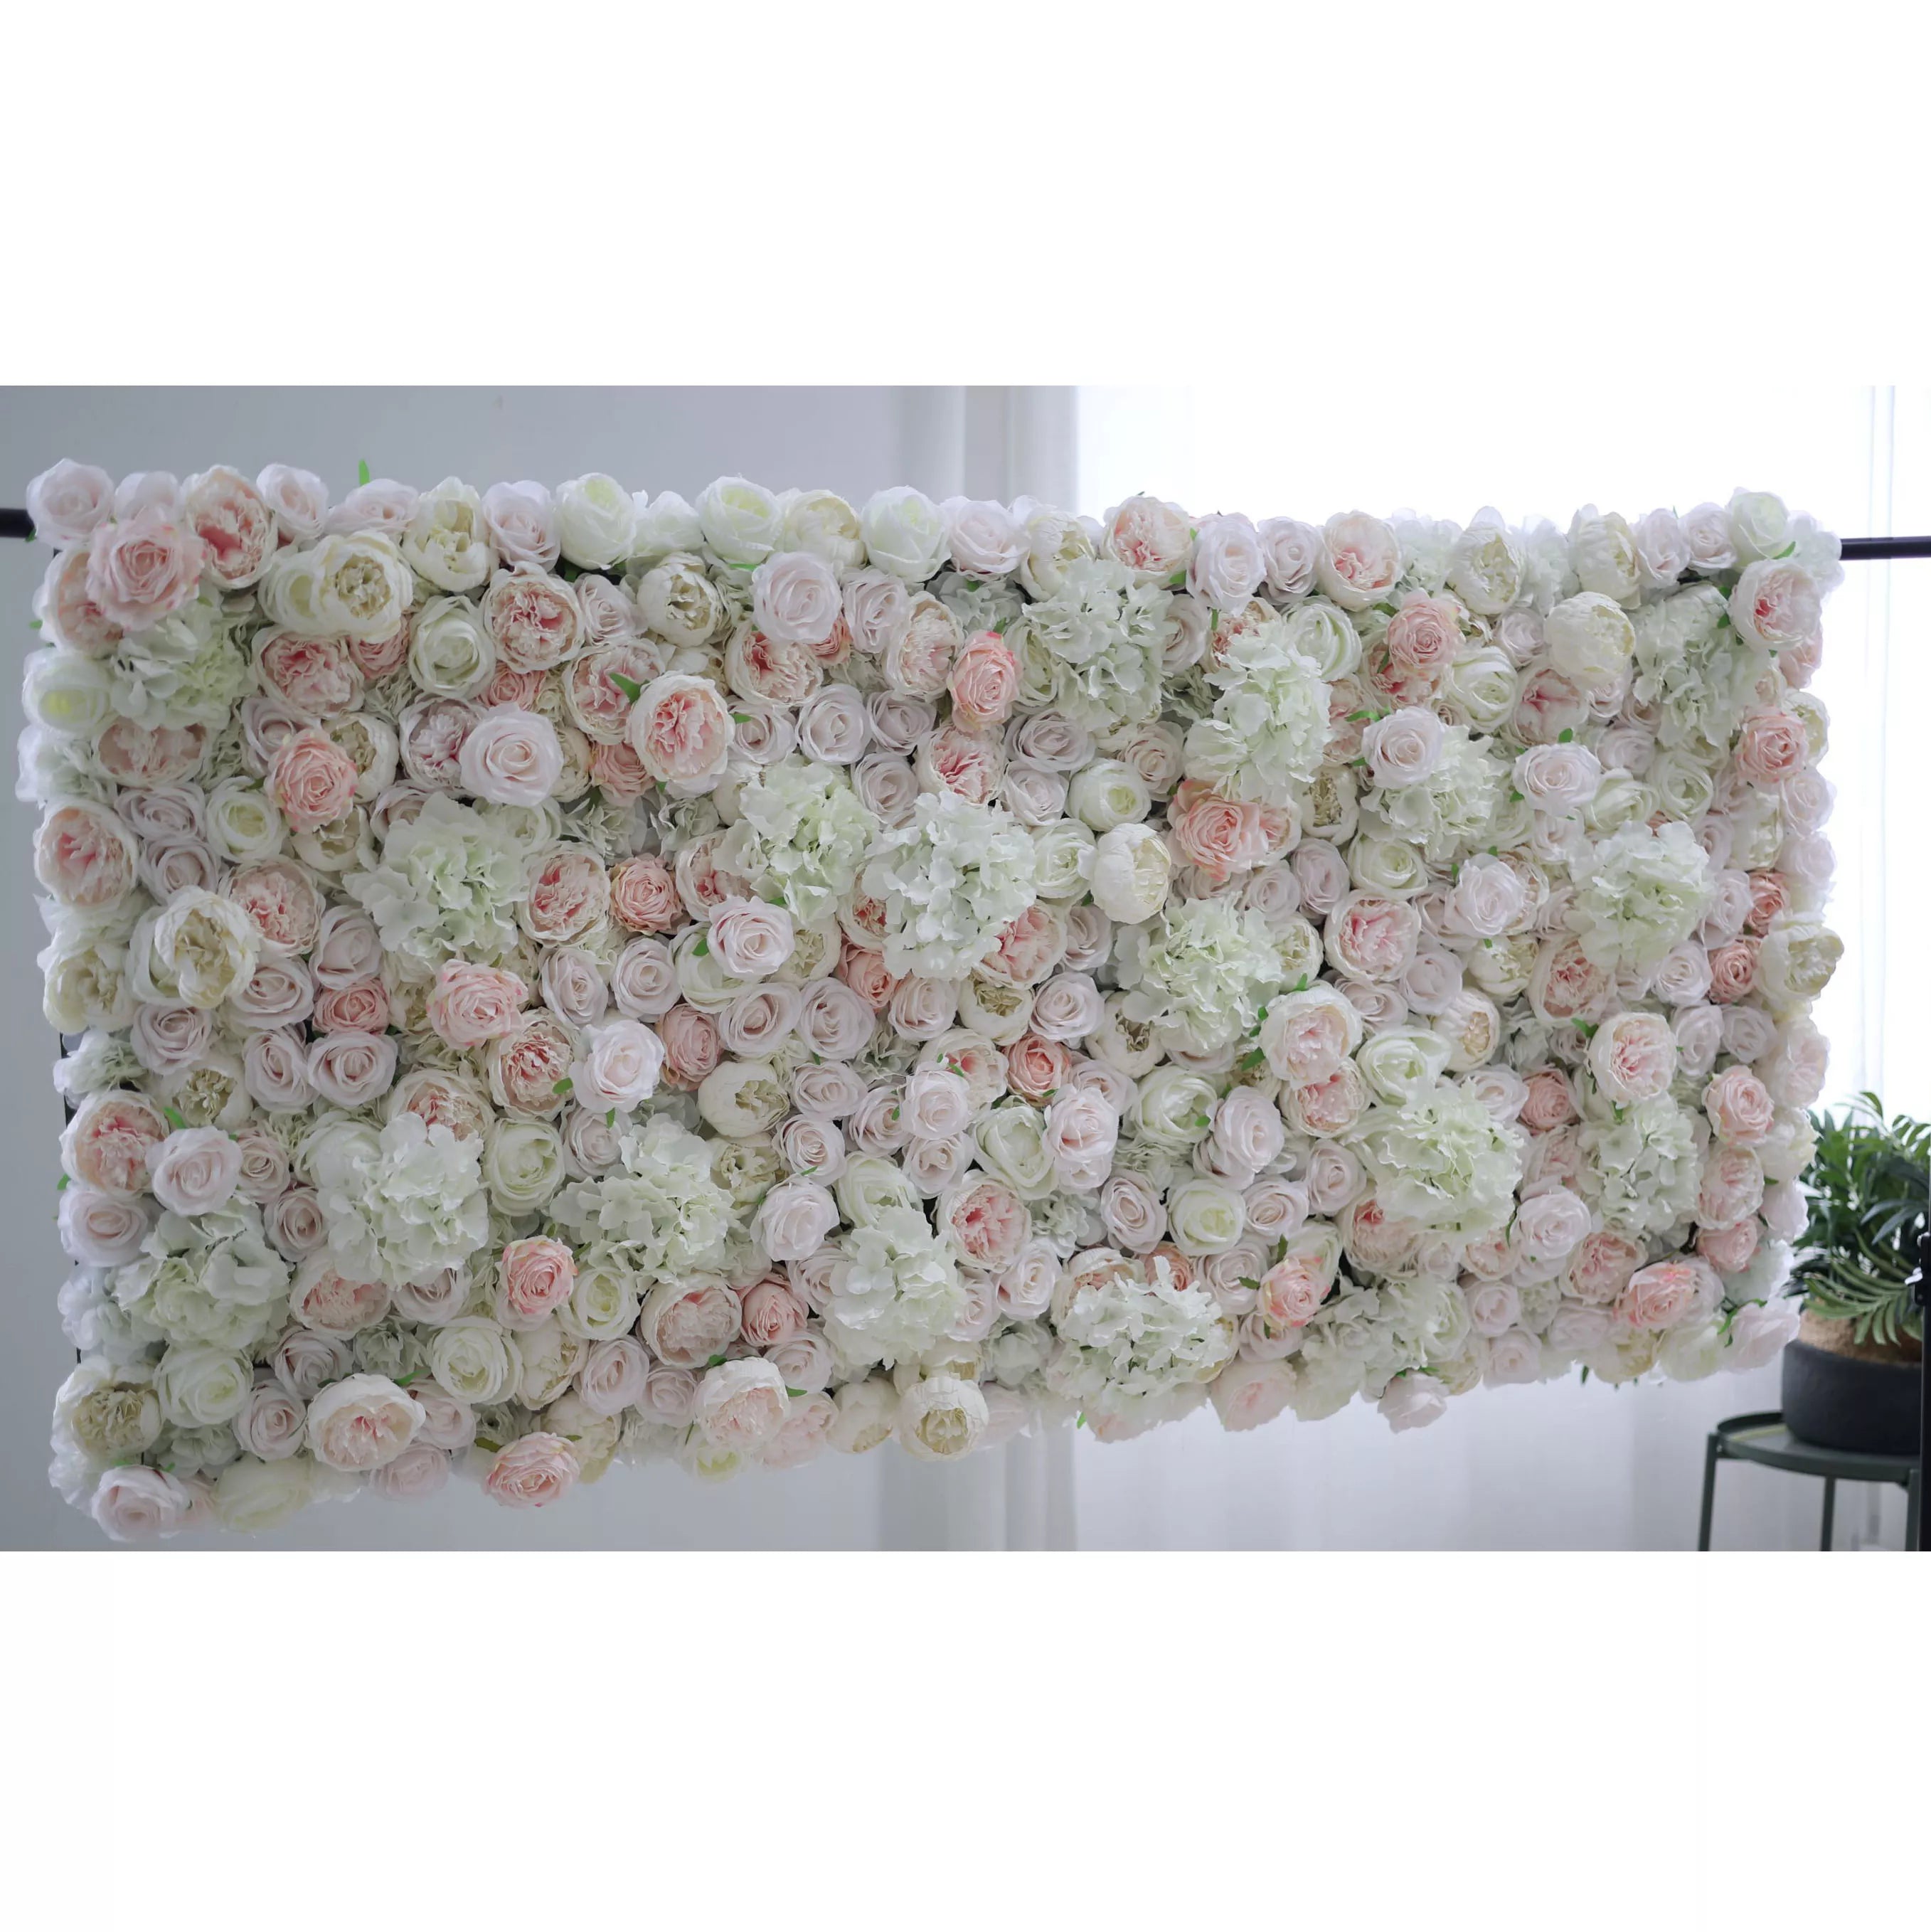 Valar Flowers Roll Up Fabric Artificial Mixed White and Light Pink Rose Color Green Leaves Wall Wedding Backdrop, Floral Party Decor, Event Photography, Spa Decor-VF-090-2